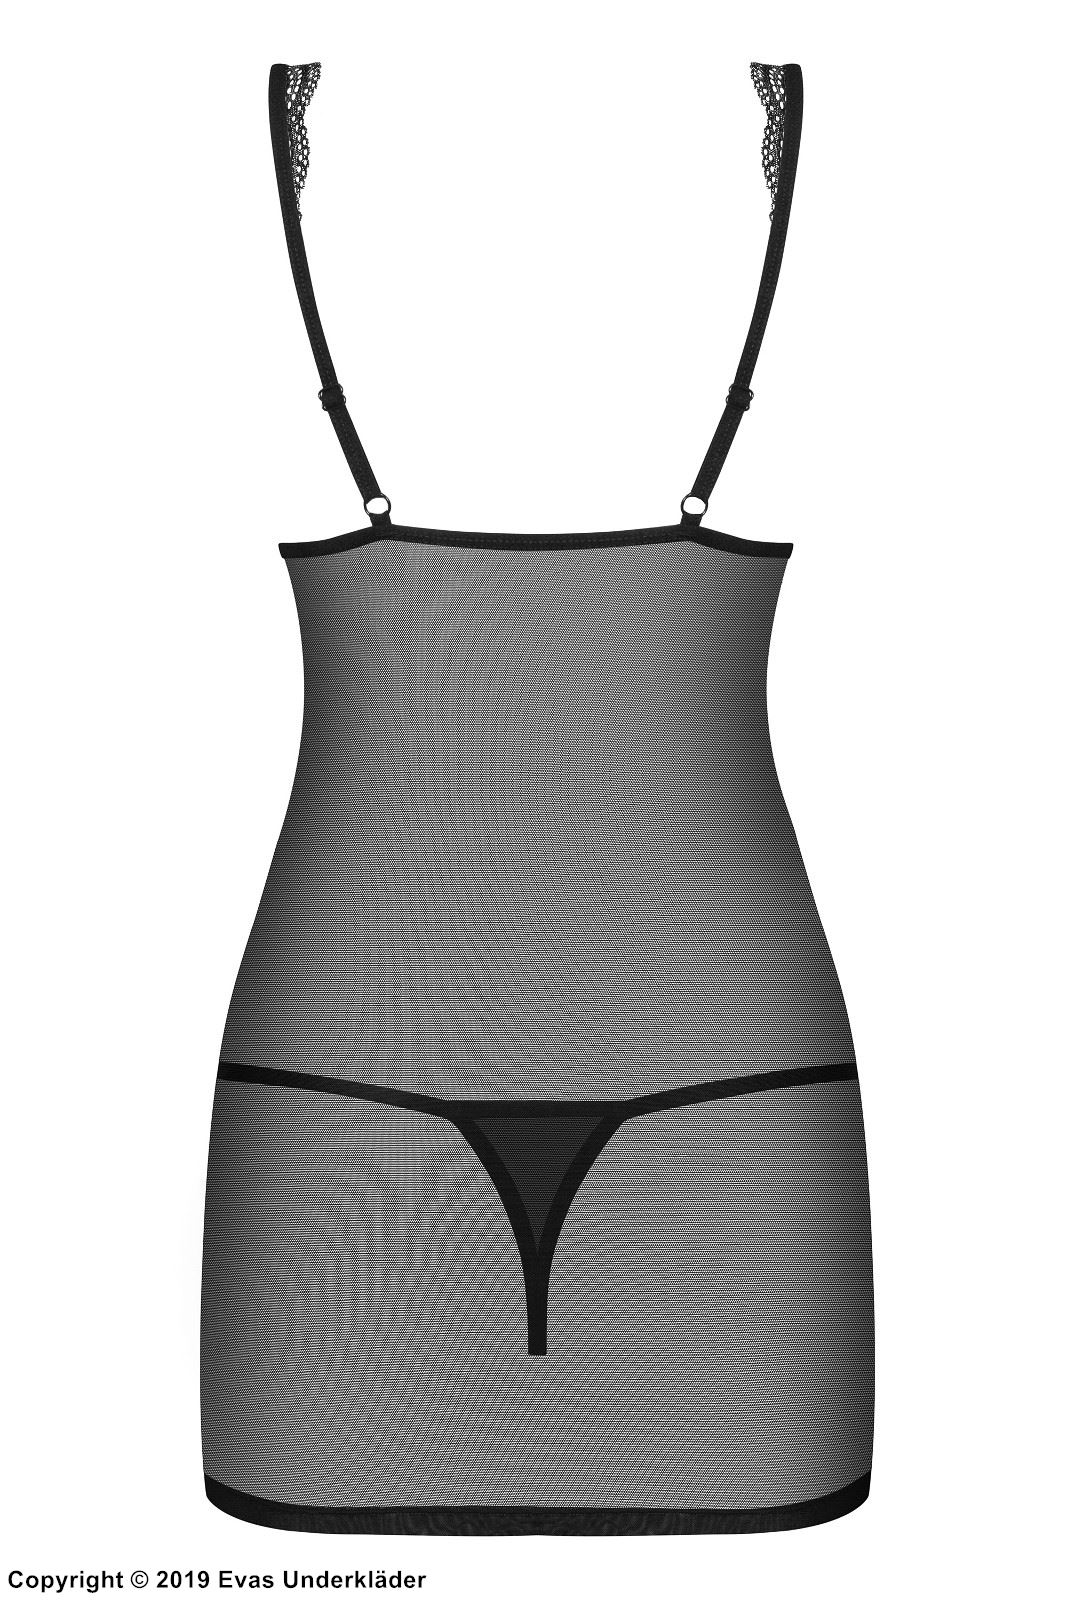 Skin-tight chemise, sheer mesh, lace panel